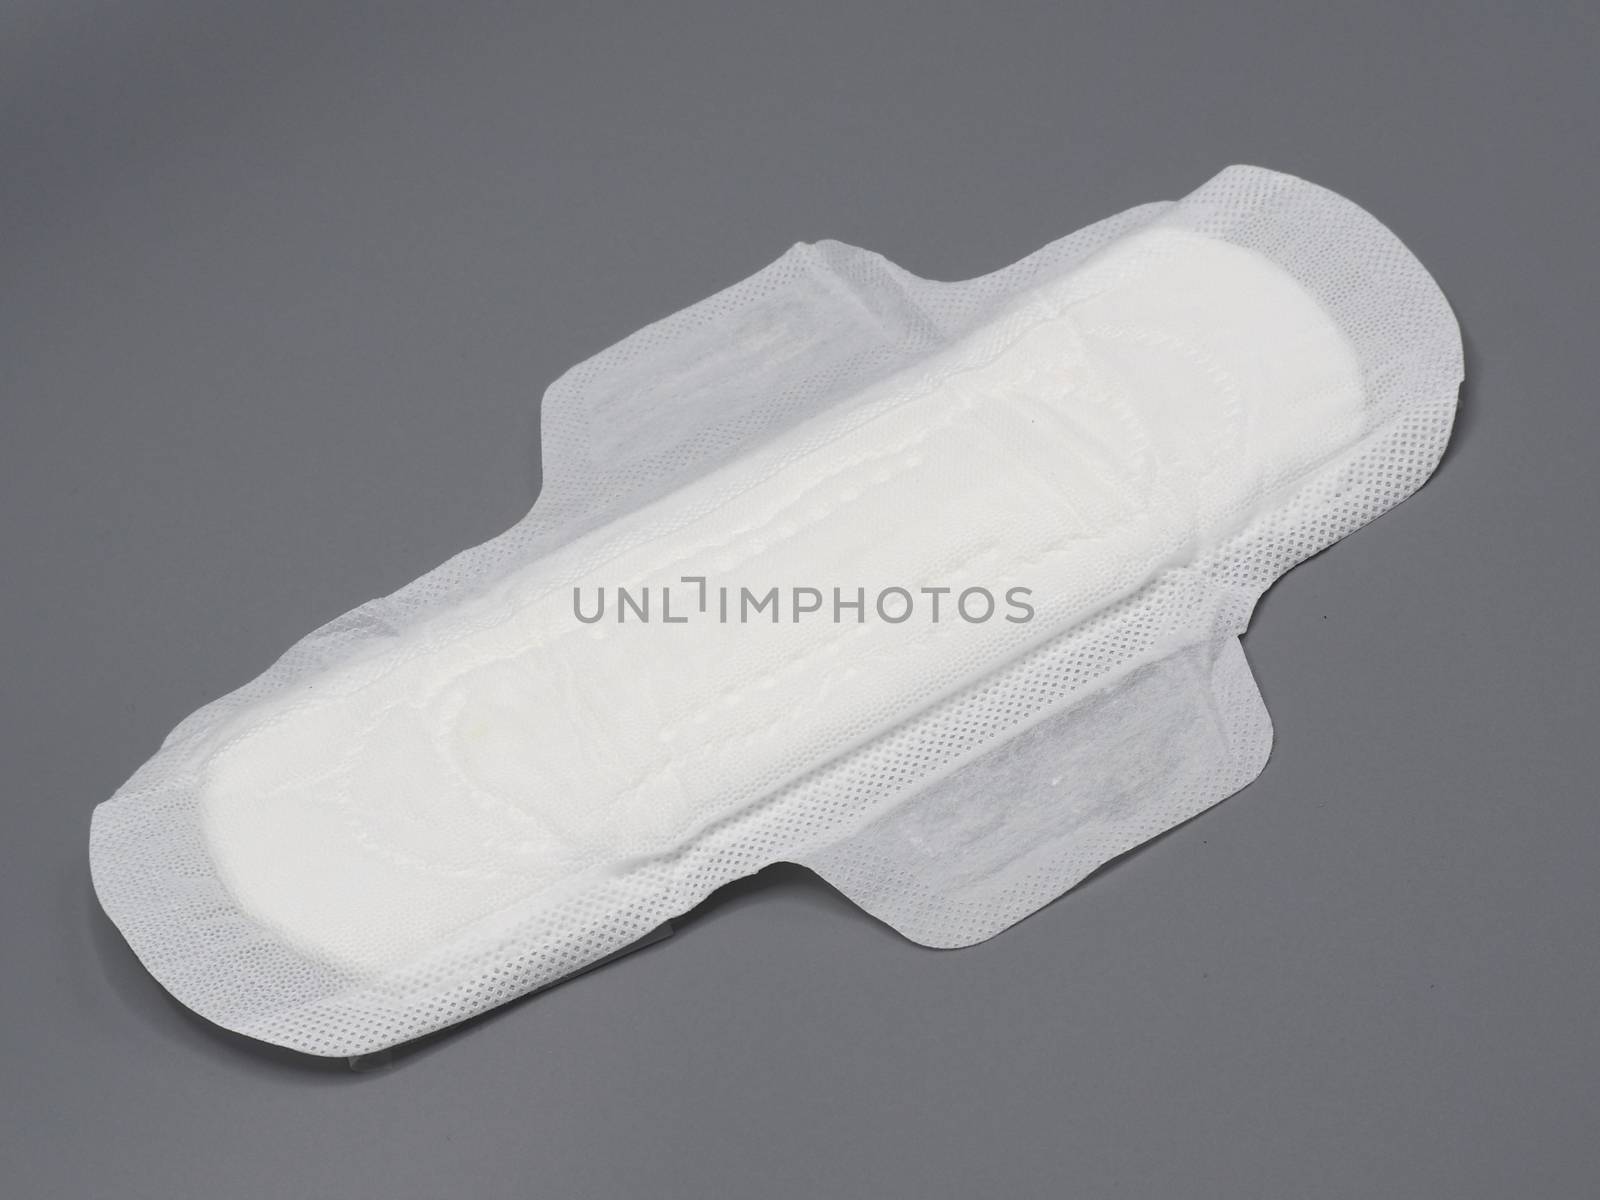 Hygenic organic cotton soft and comfort sanitary napkin pad for woman and grey background.